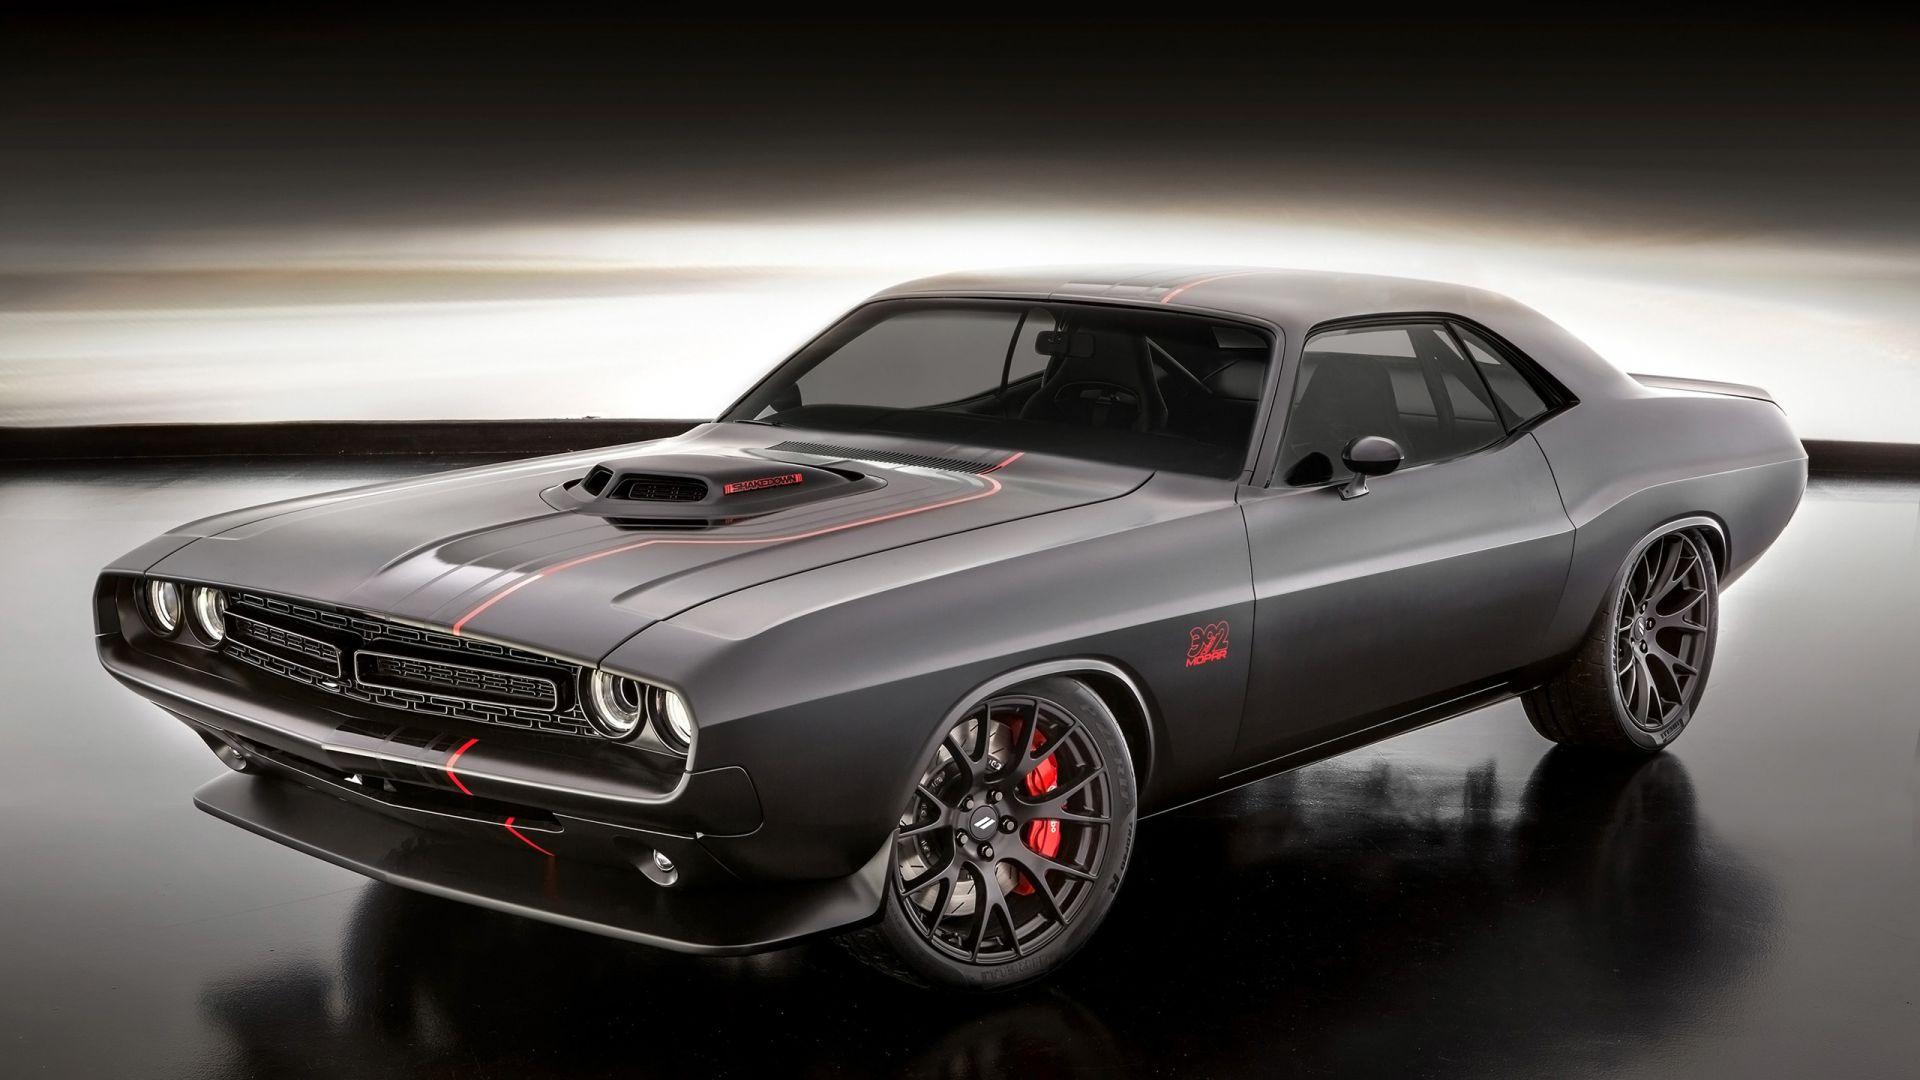 Wallpaper Dodge Challenger, gray muscle car, side view